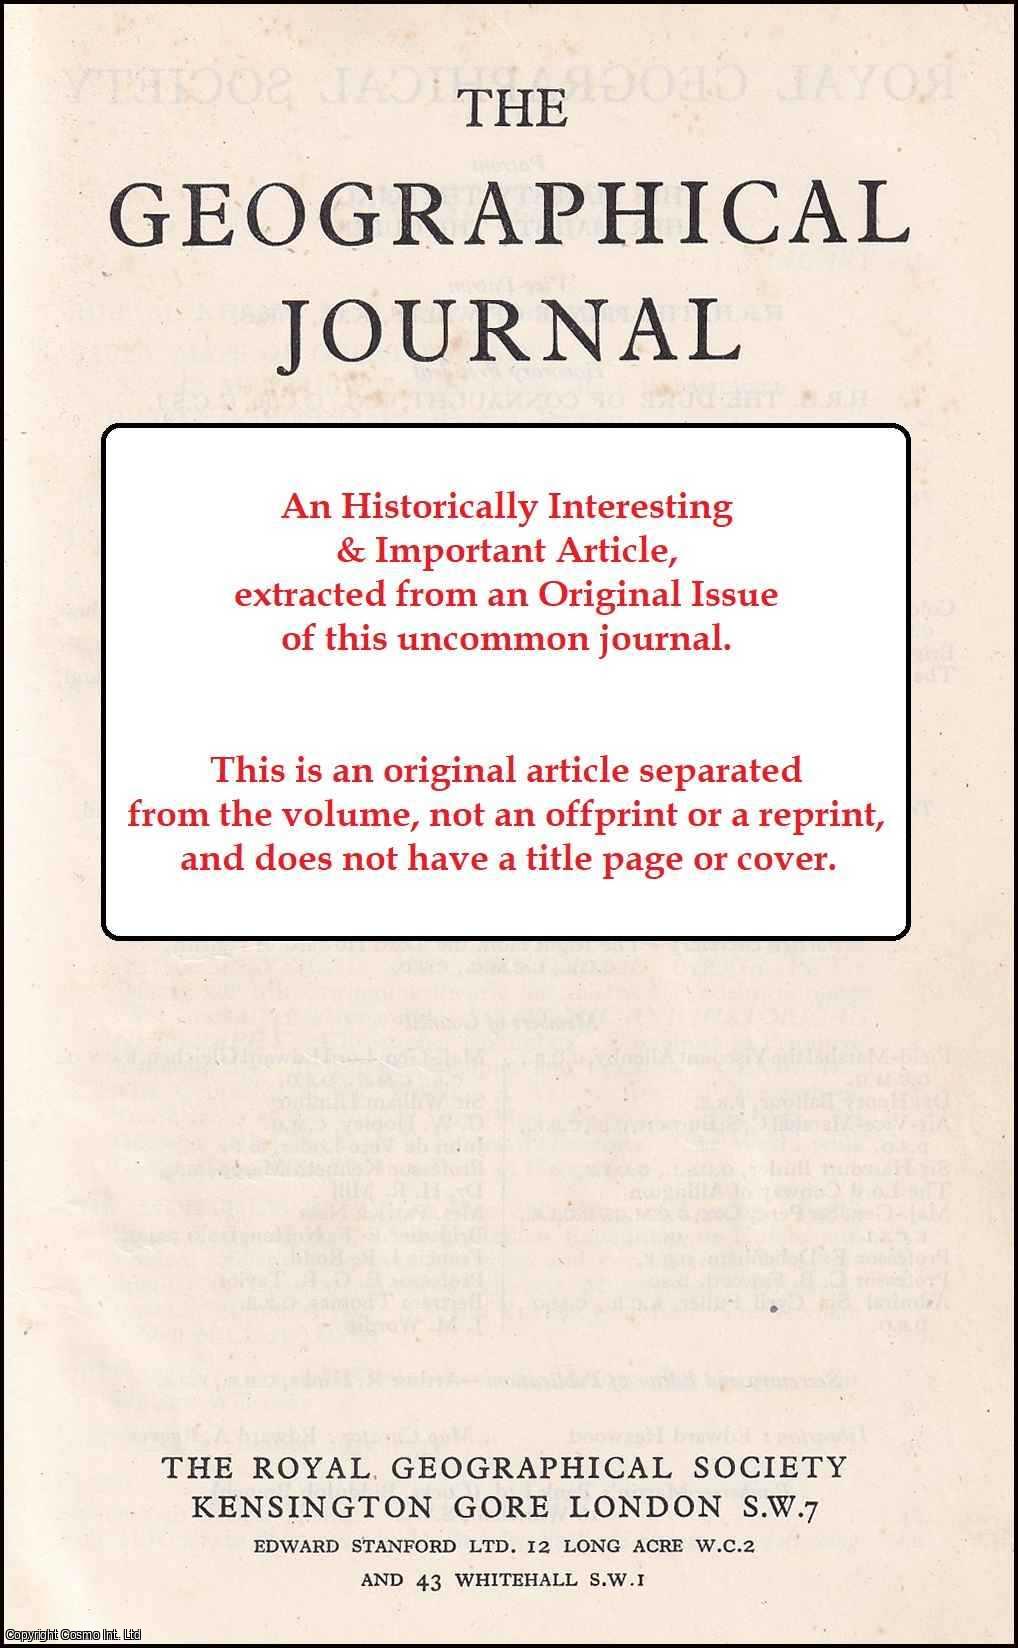 Jean Gottmann - Expanding Metropolis: Review. An original article from the Geographical Journal, 1970.